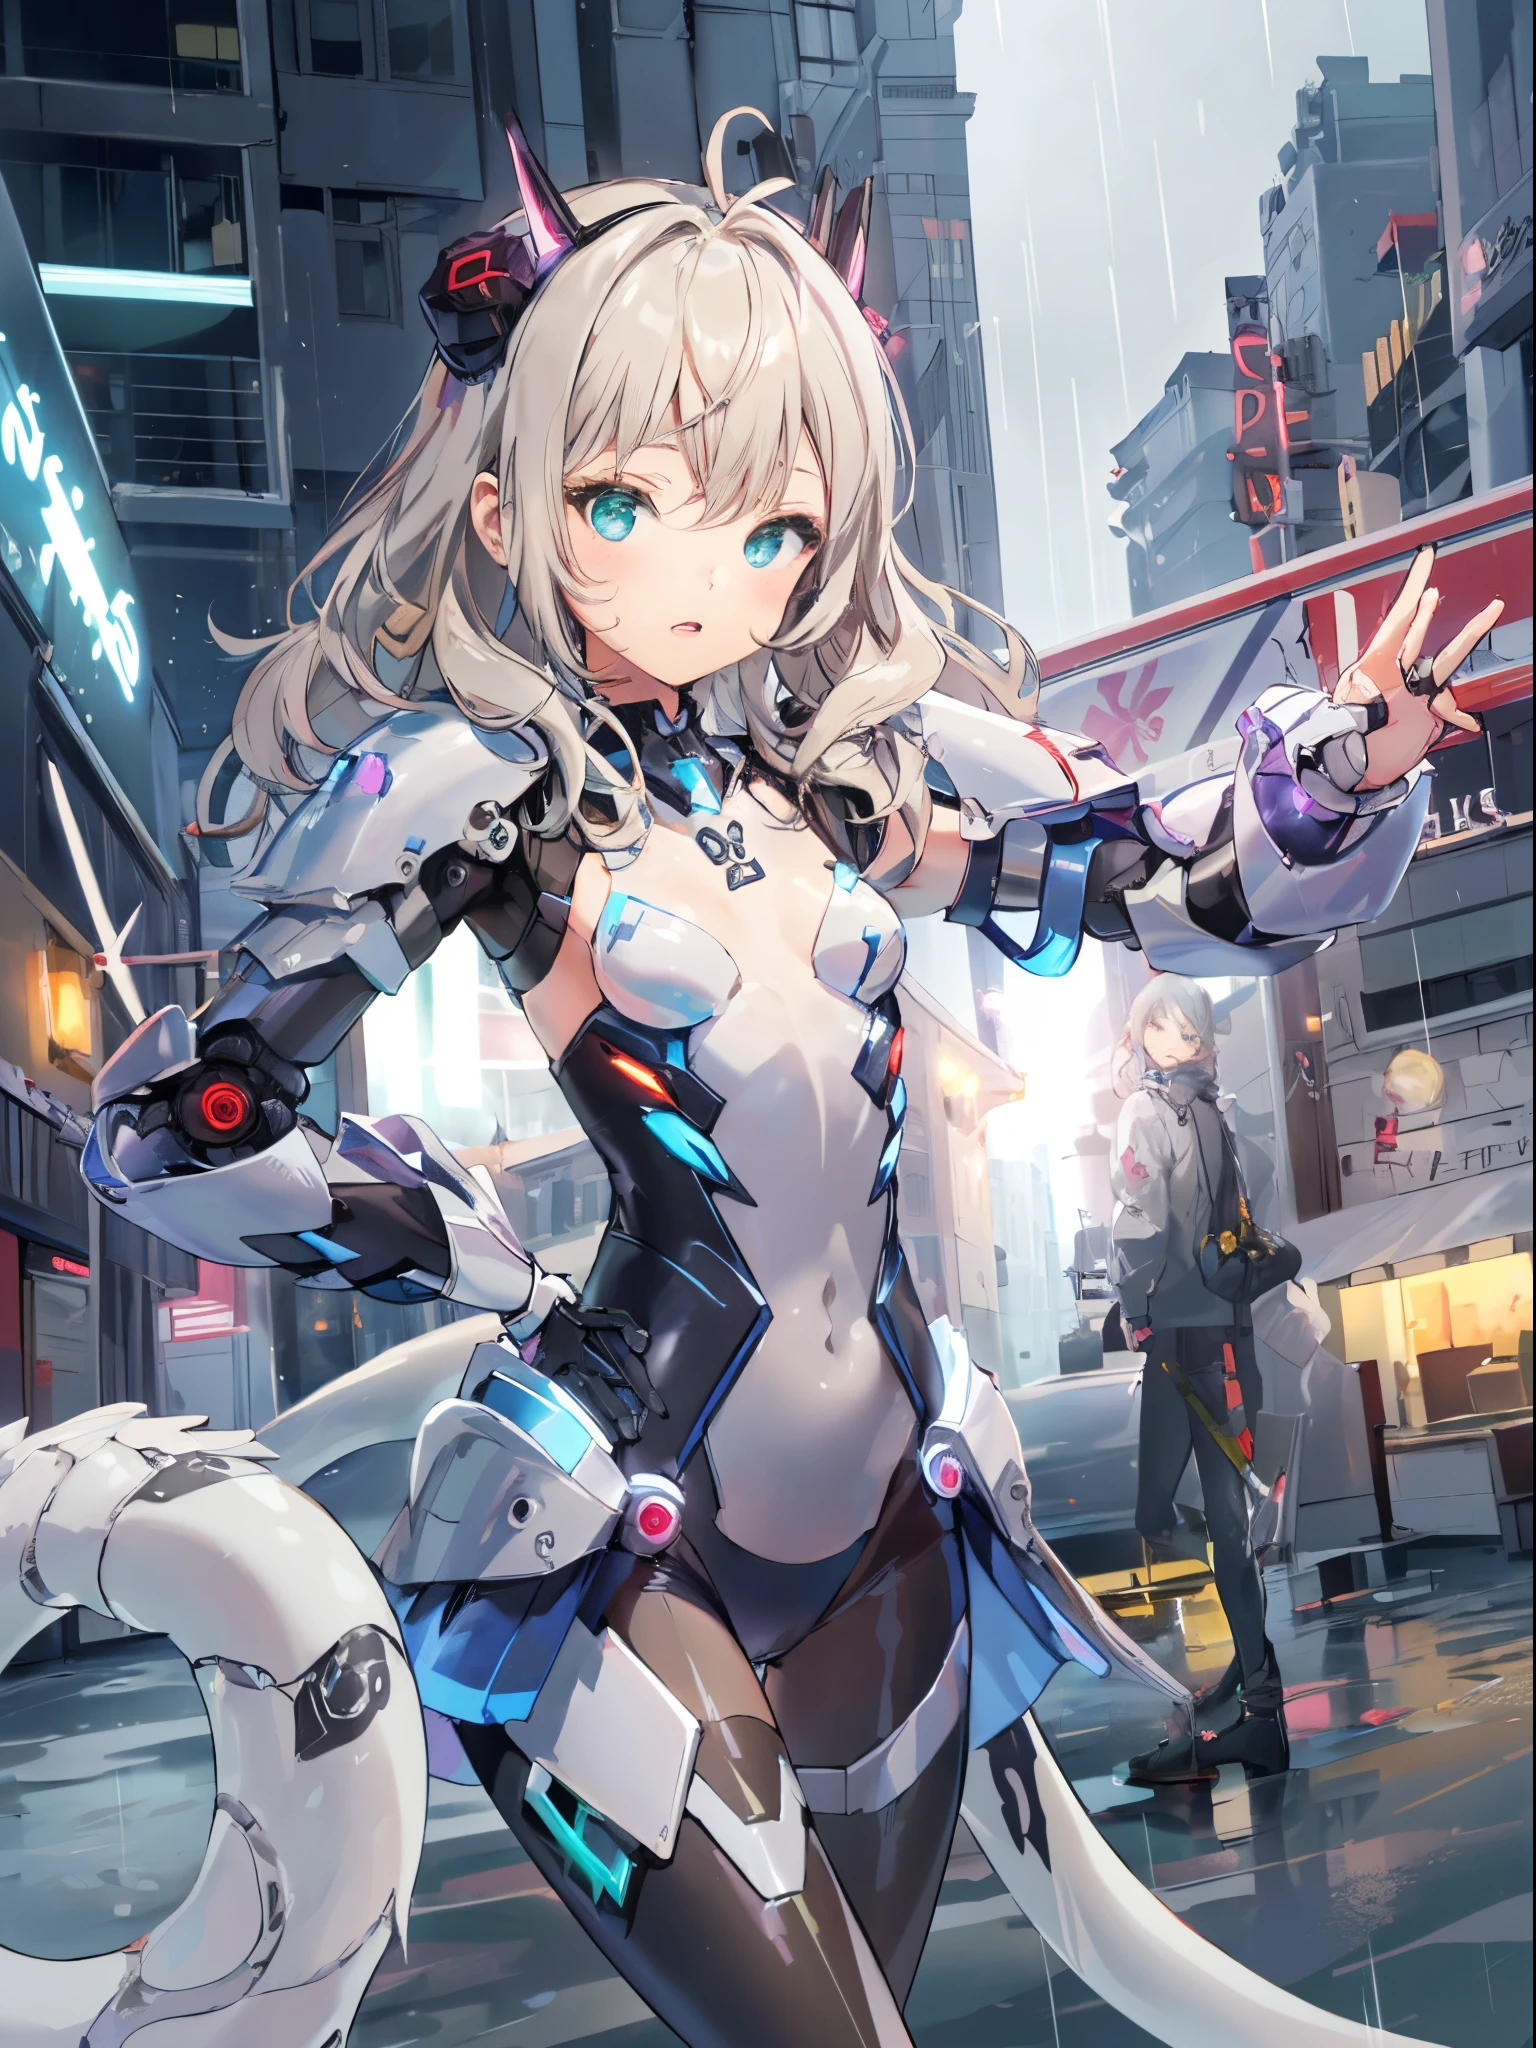 ((​masterpiece:1.4、top-quality))+、(ultra-detailliert)+、
1 girl in、cyberpunkcity、flat-chest、hair wavy、mecha clothes、(robot girl)、Cool move、Silver Bodysuit、colorful backdrop、rainy day、(lightning effects)、Silver Dragon Armor、(cold face)、cowboy  shot、cute girl